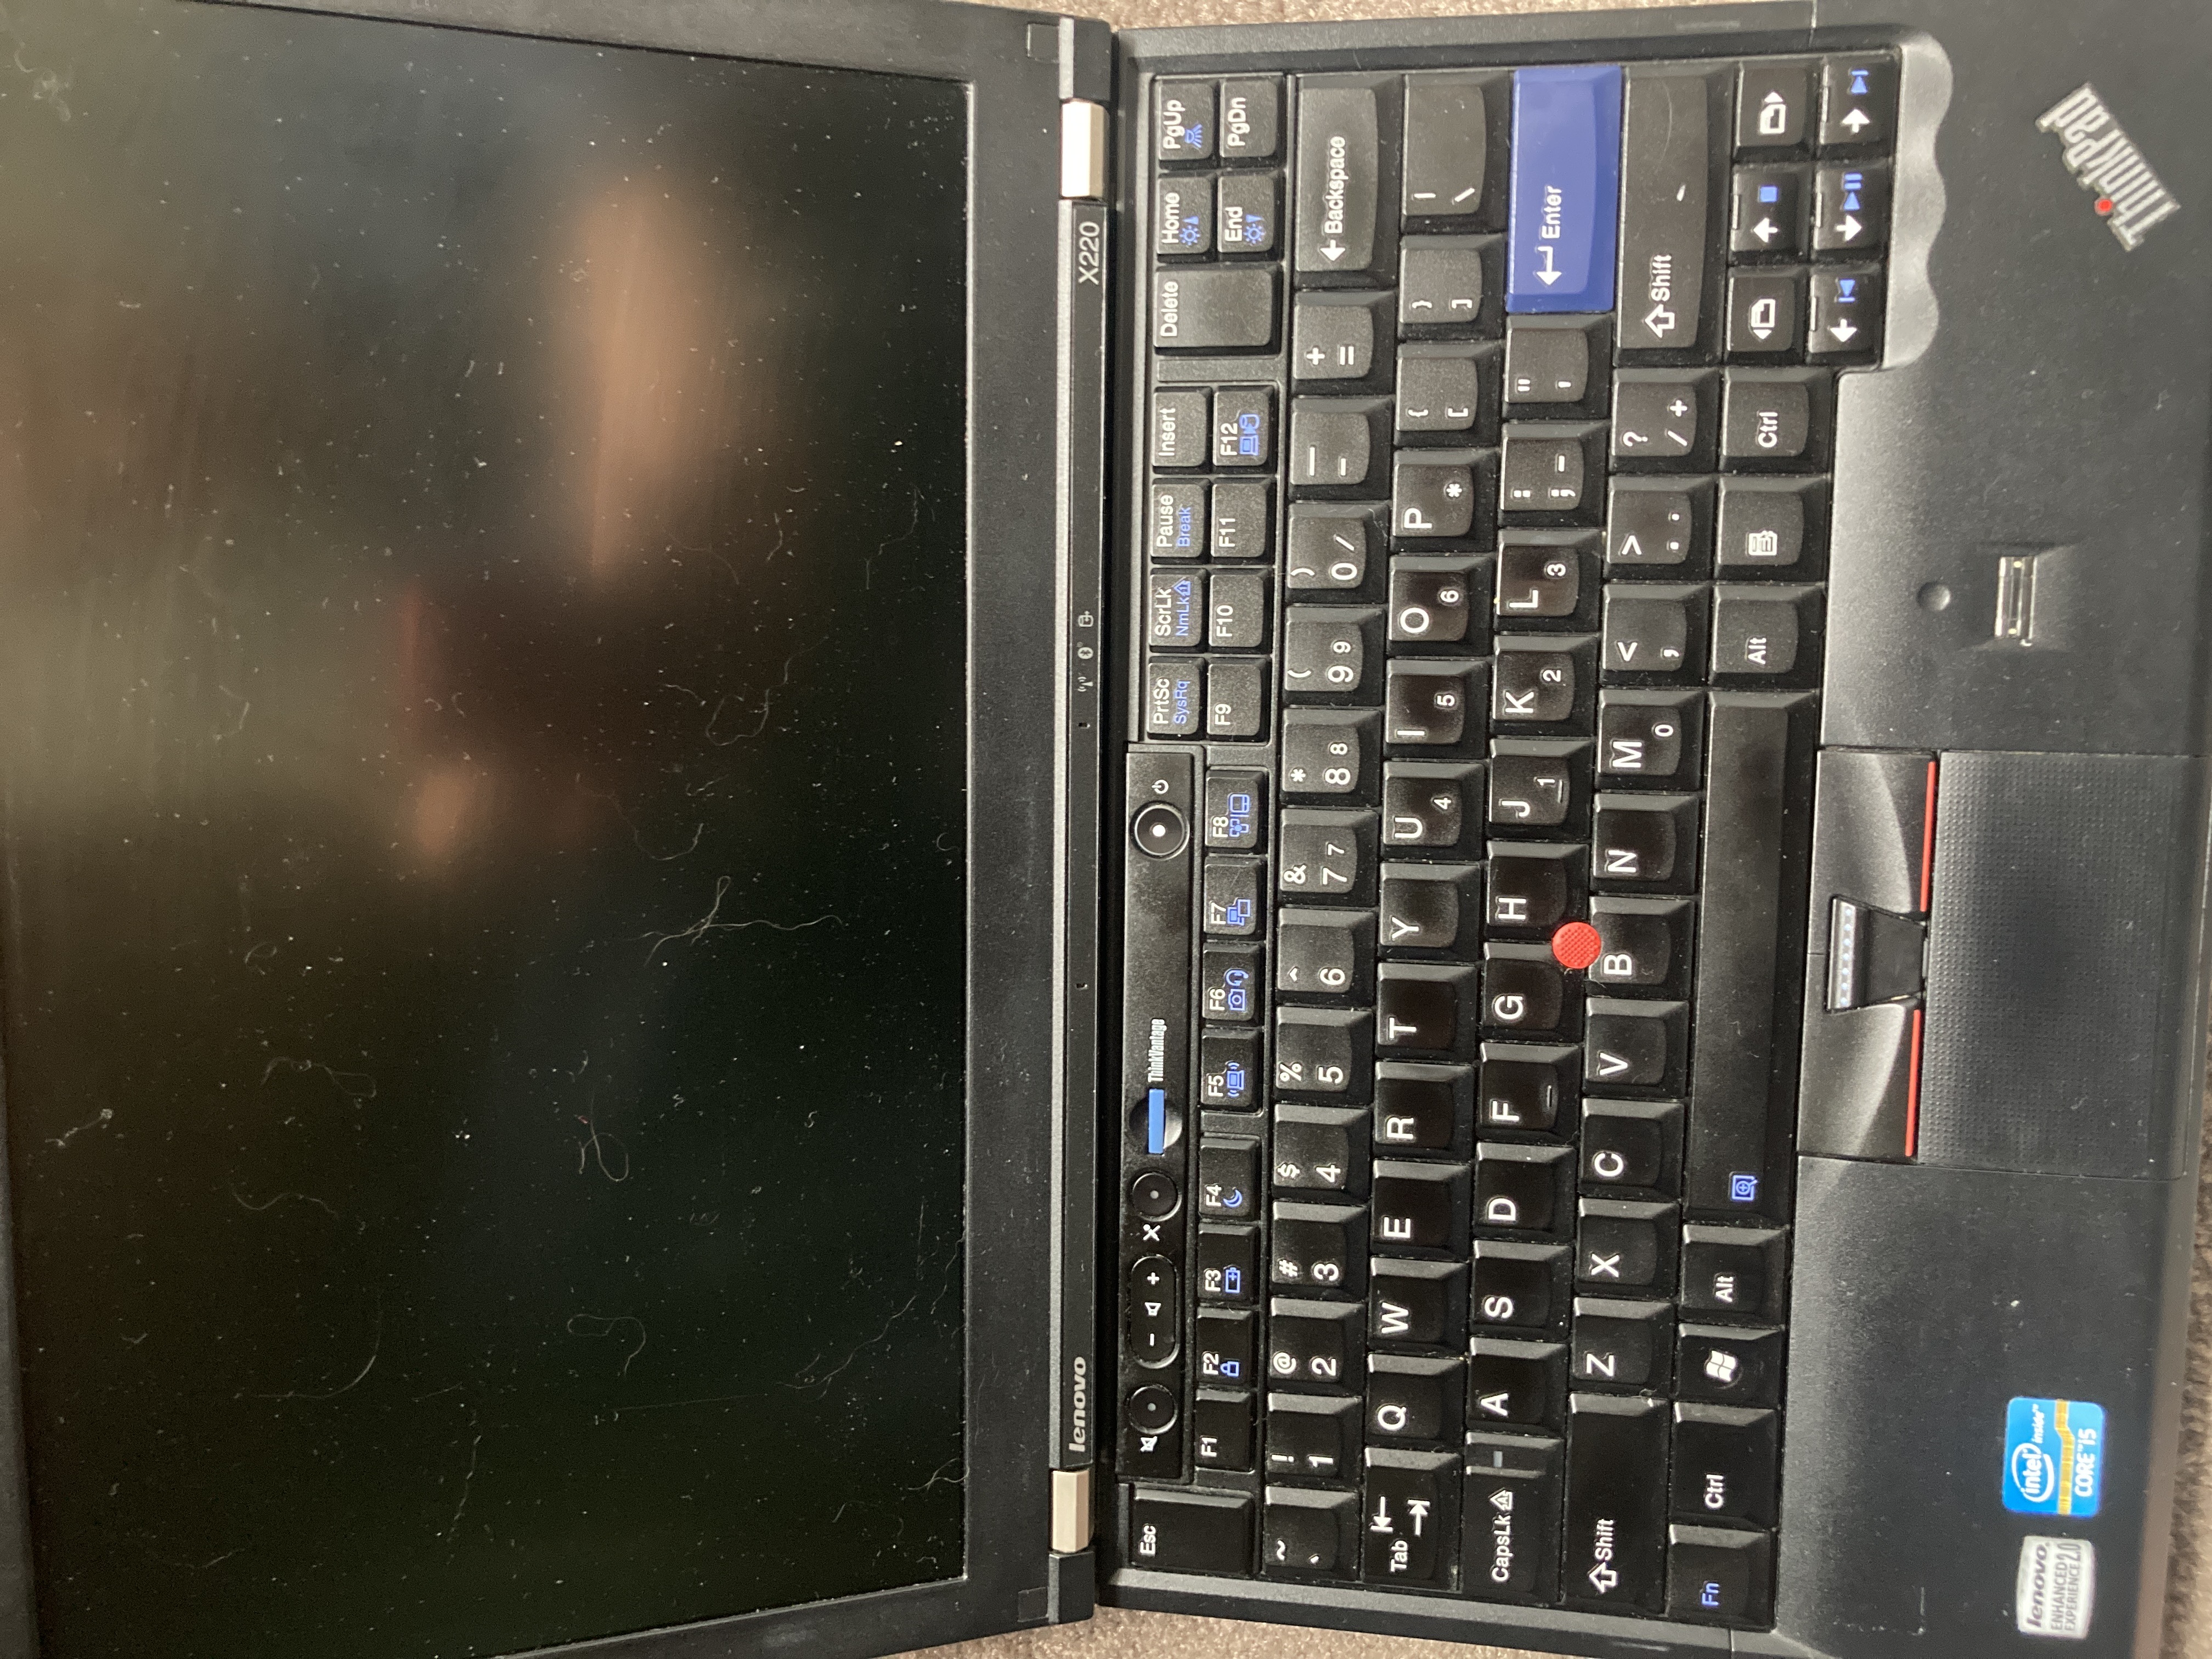 The thinkpad x220 with the lid
open, showing the screen and keyboard